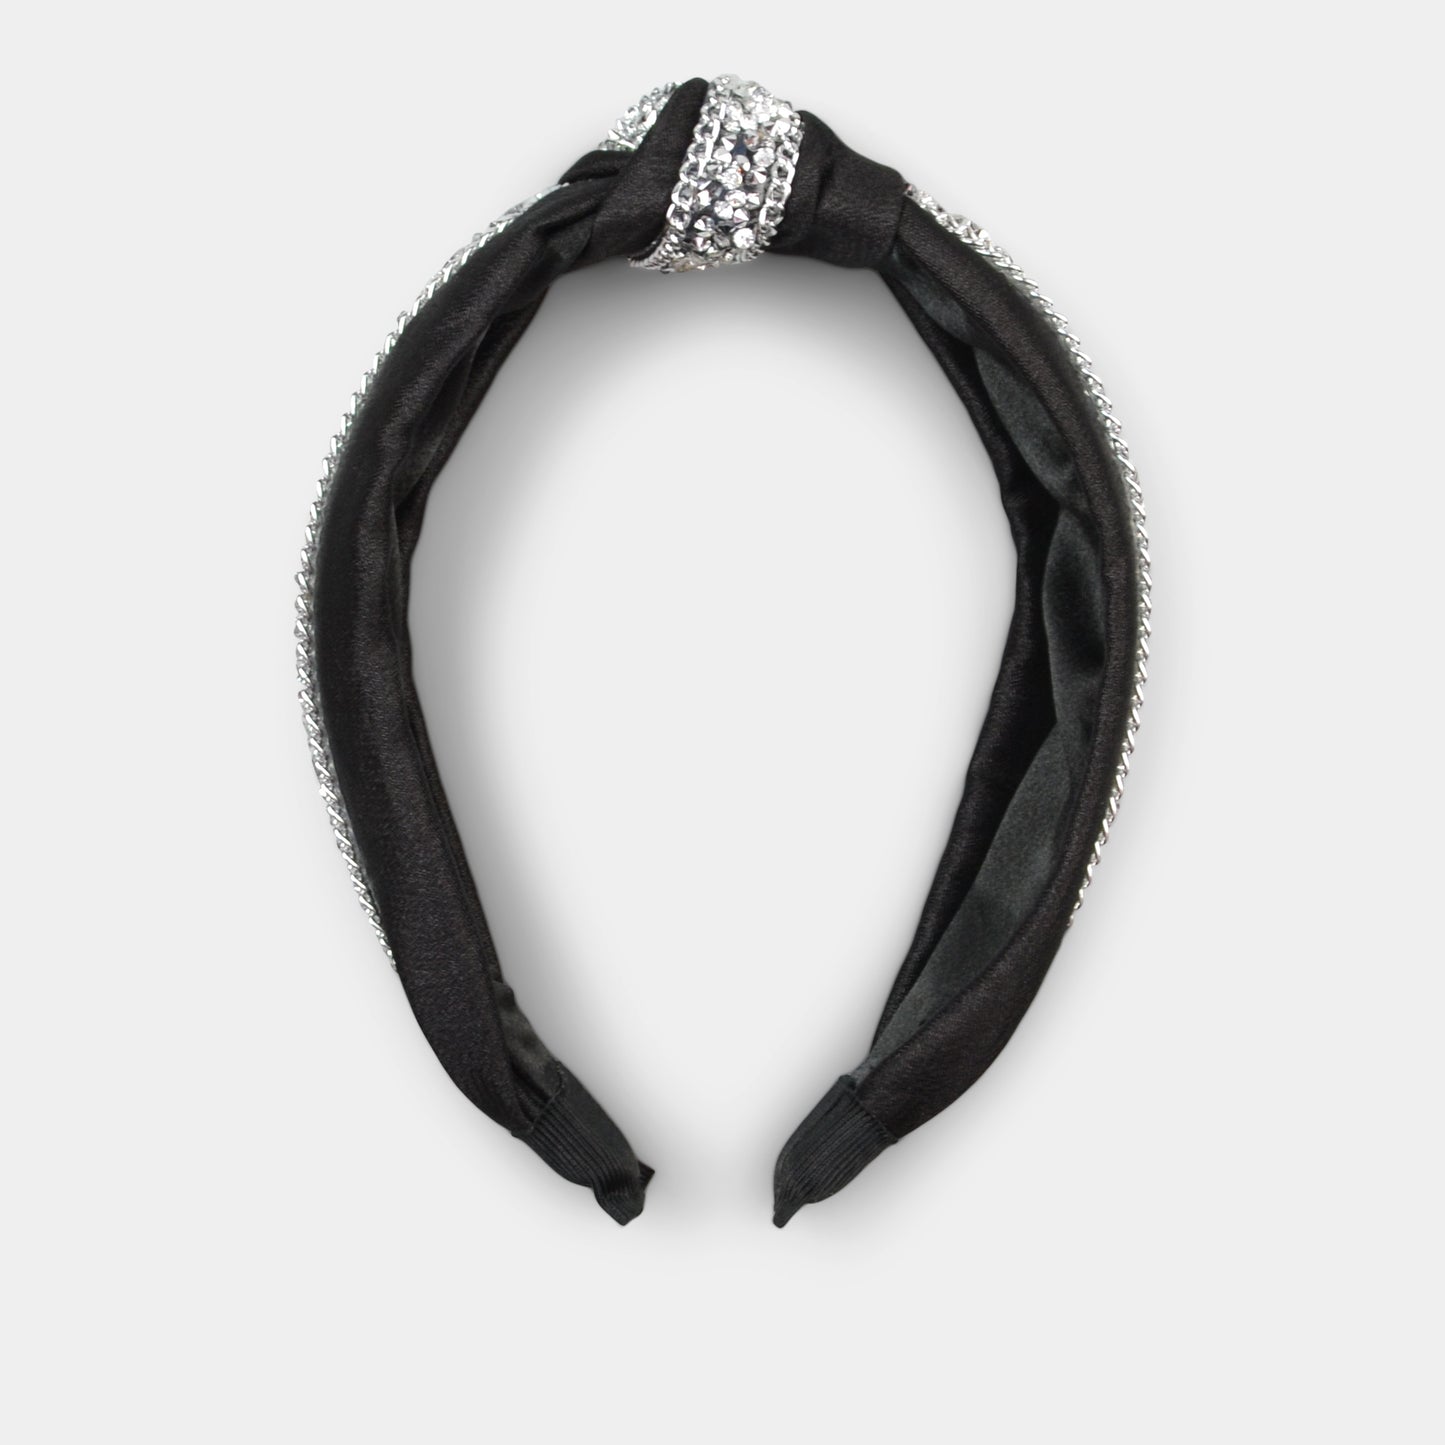 FASHION BY A STEP ABOVE HEADBAND IN BLACK